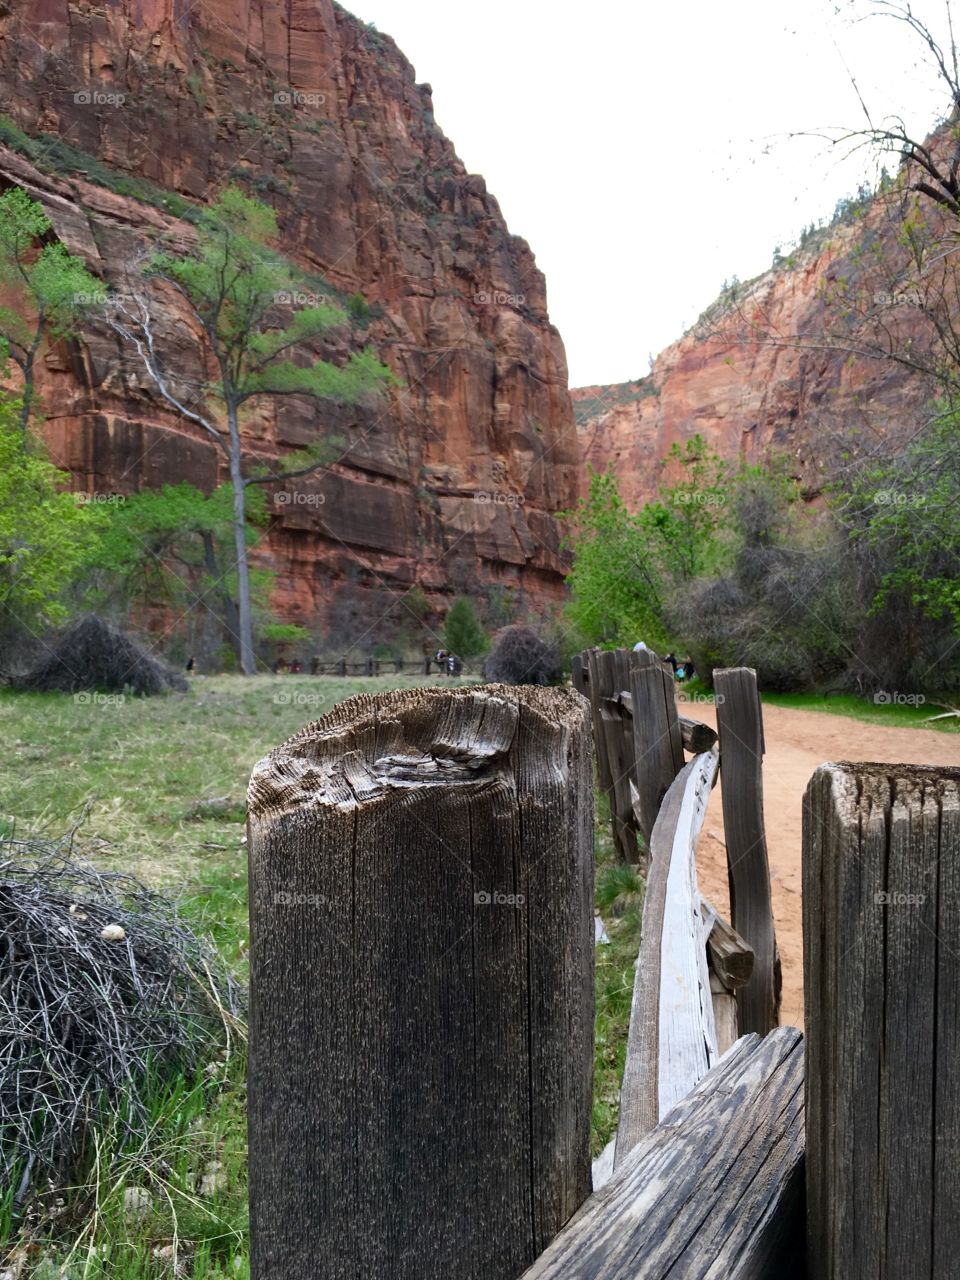 Zion fence